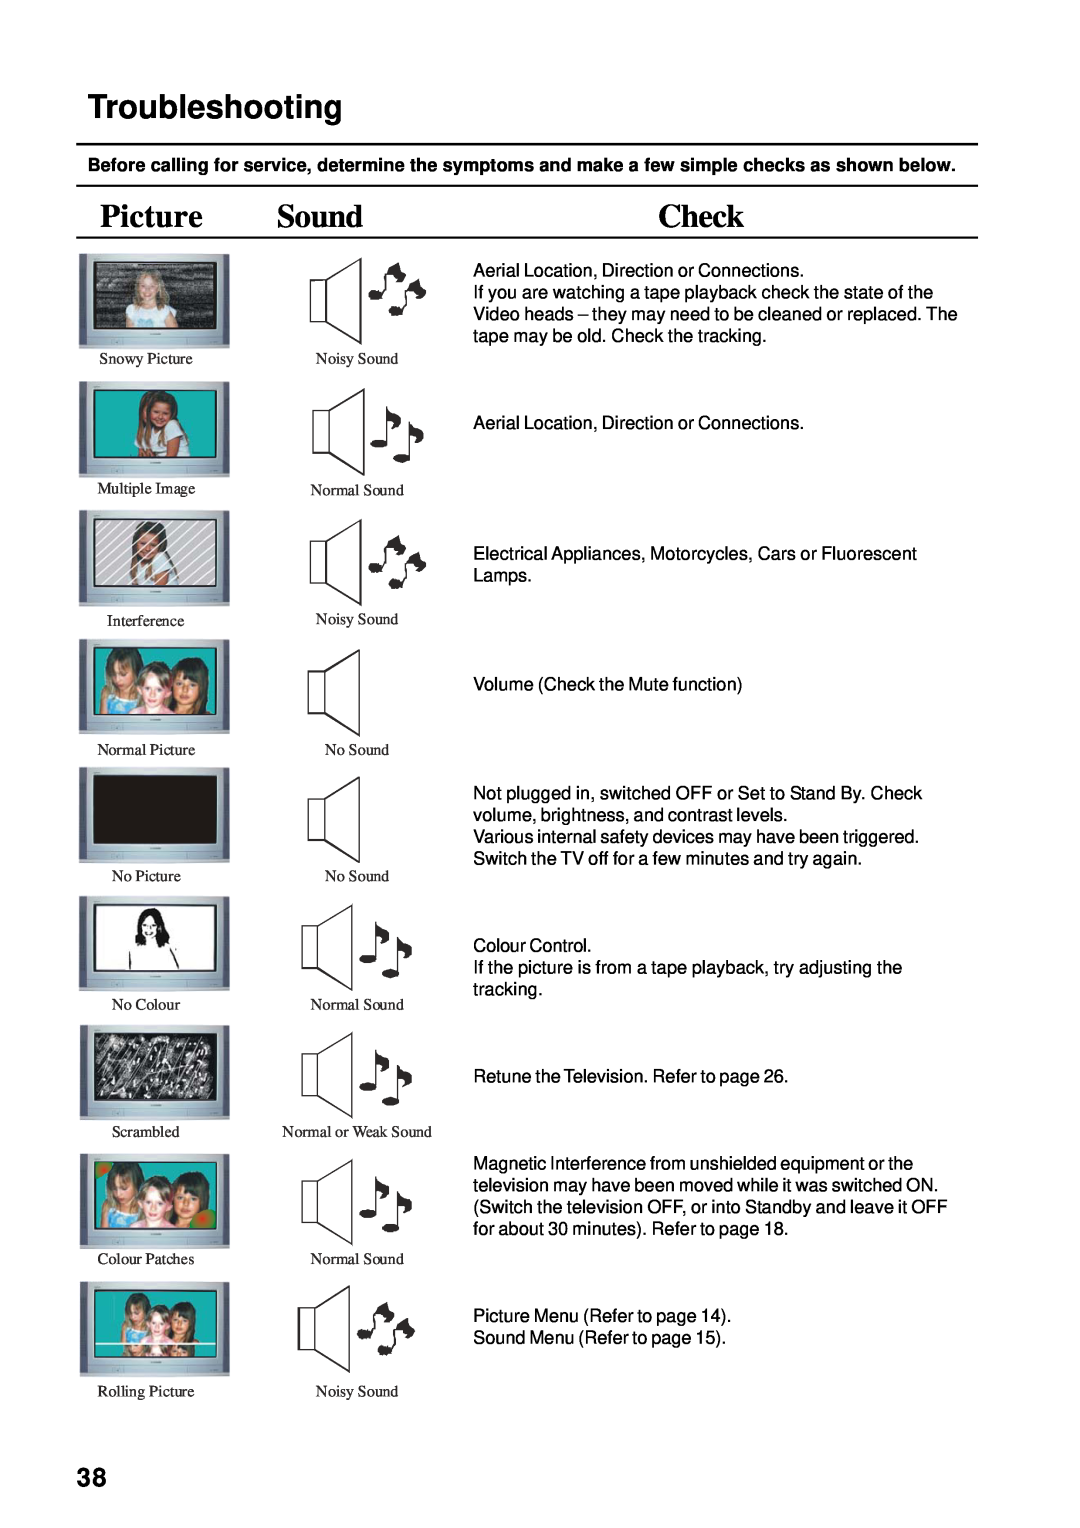 Panasonic TX-76PW155A, TX-86PW155A, TX-76PW60A, TX-66PW60A instruction manual Troubleshooting, Picture, Sound, Check 